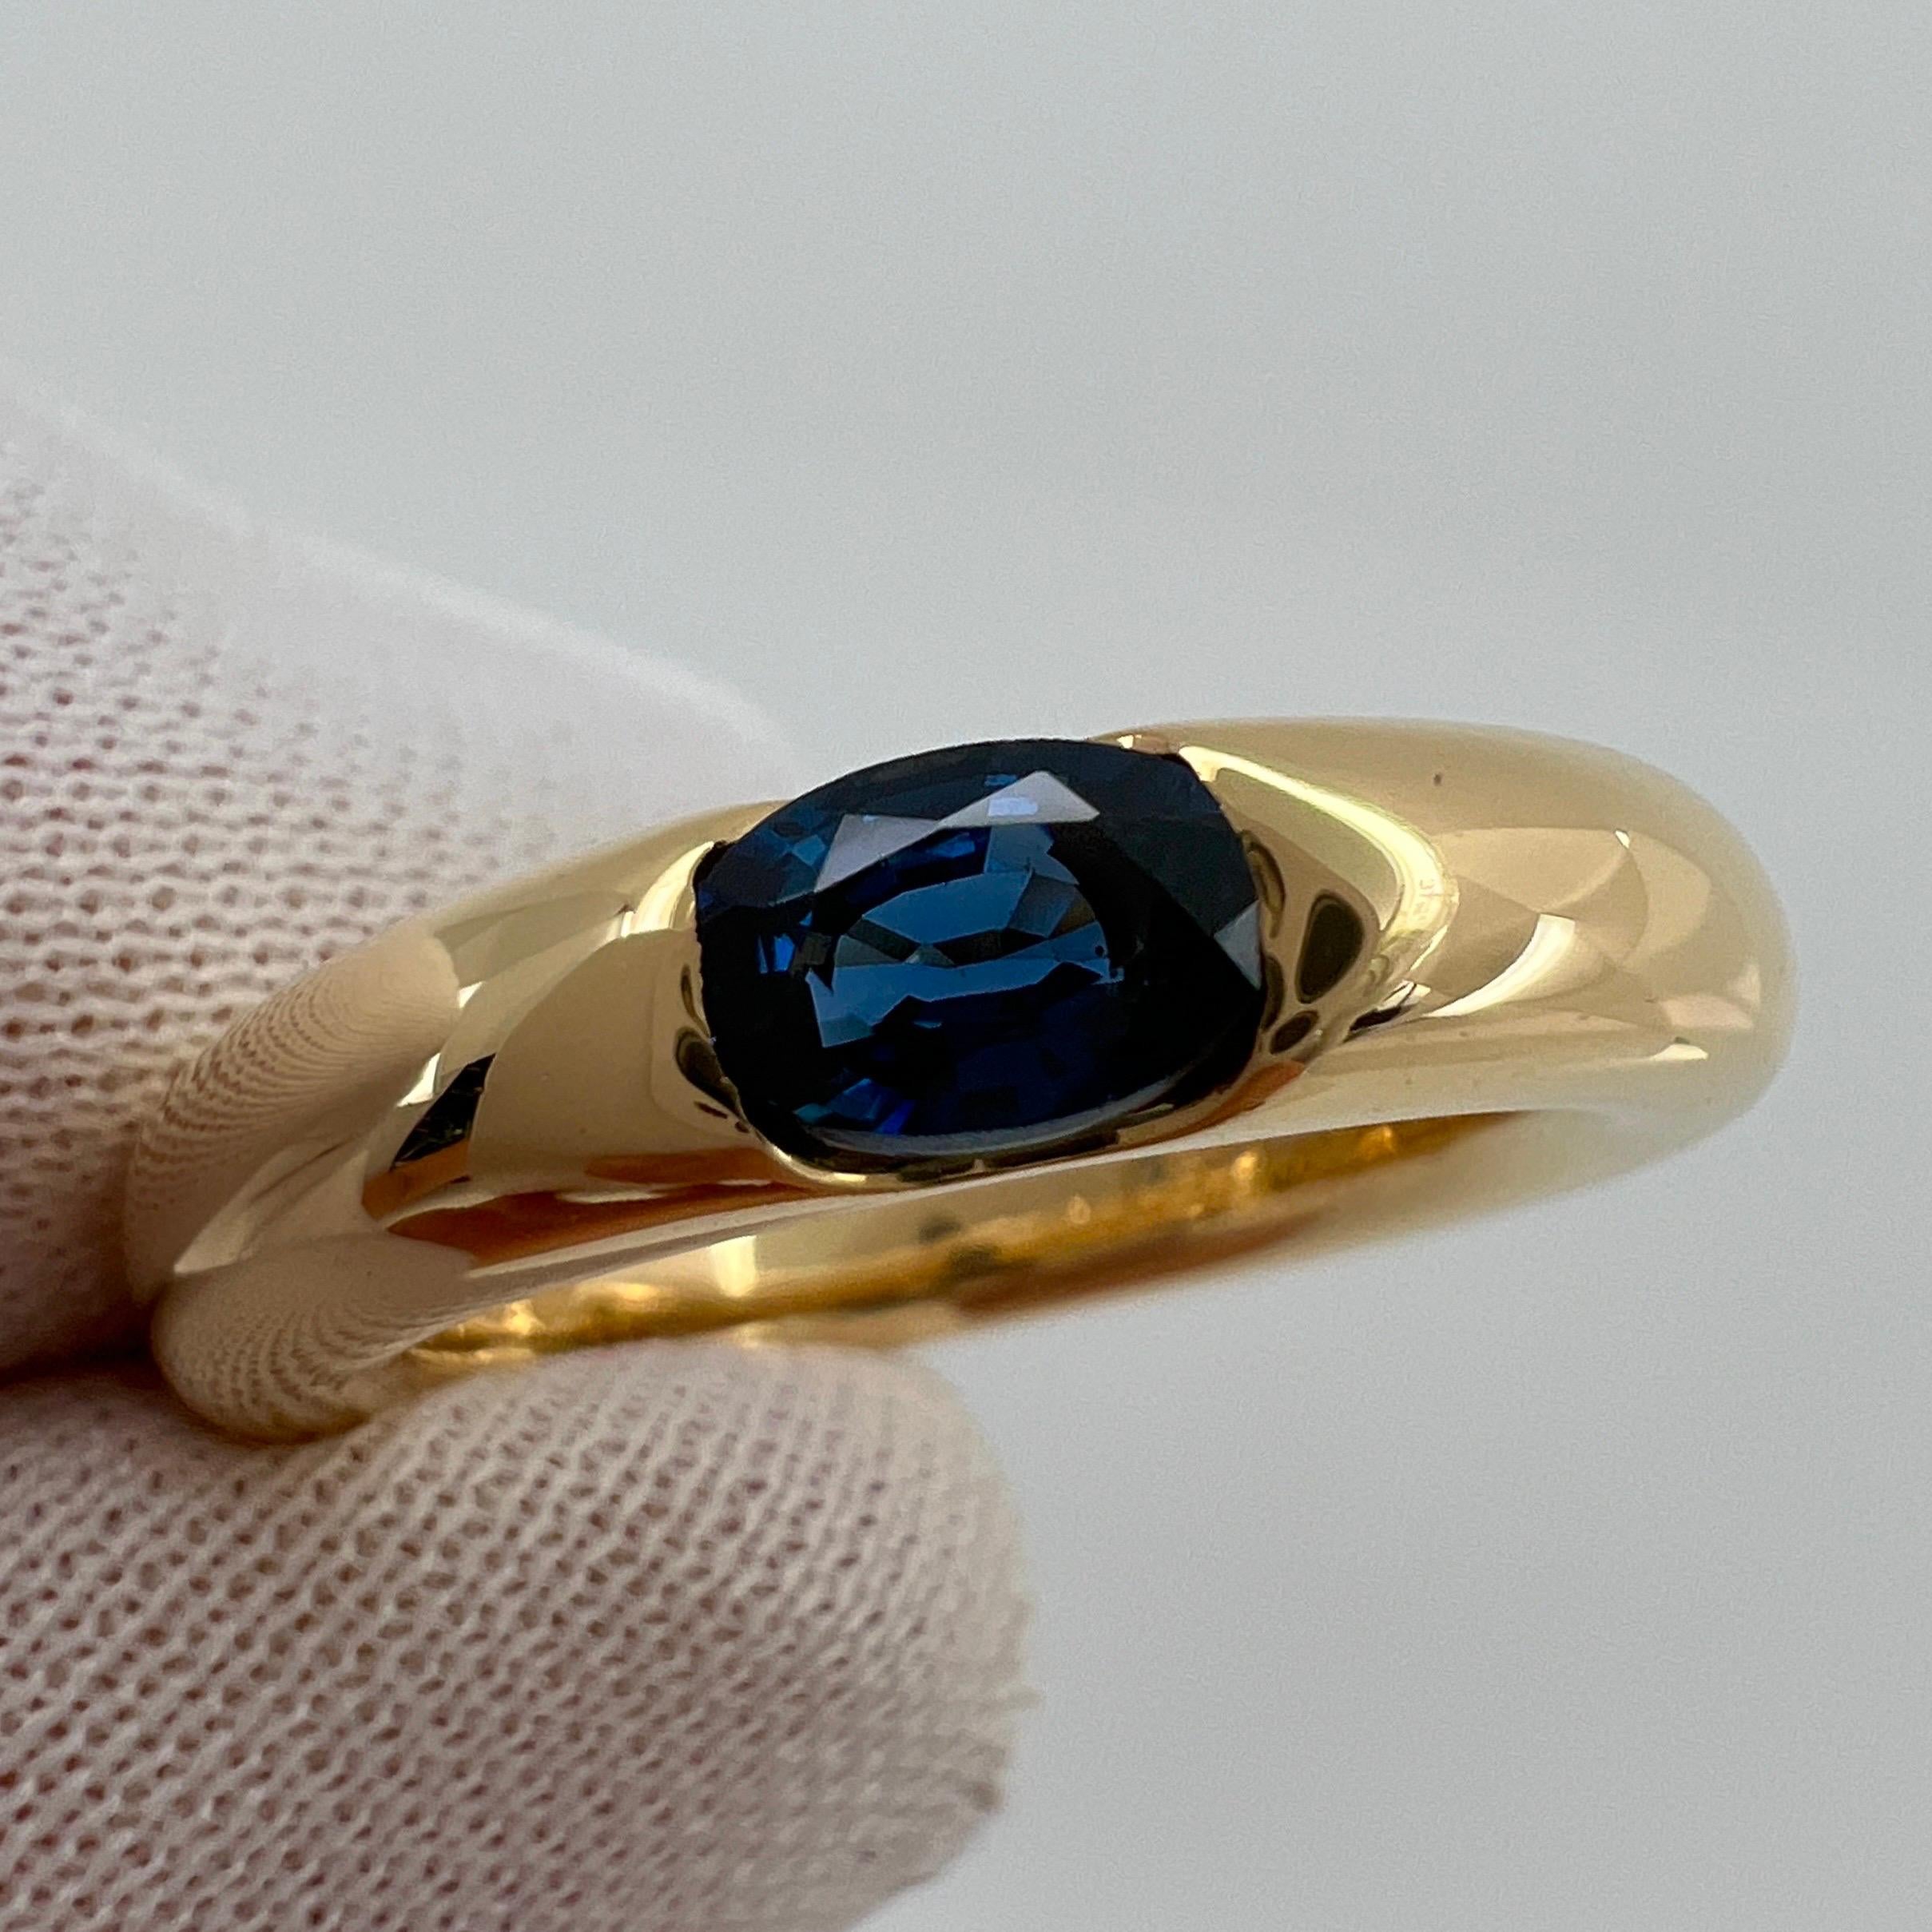 Vintage Cartier Deep Blue Sapphire Oval Ellipse 18k Yellow Gold Solitaire Ring 5 3